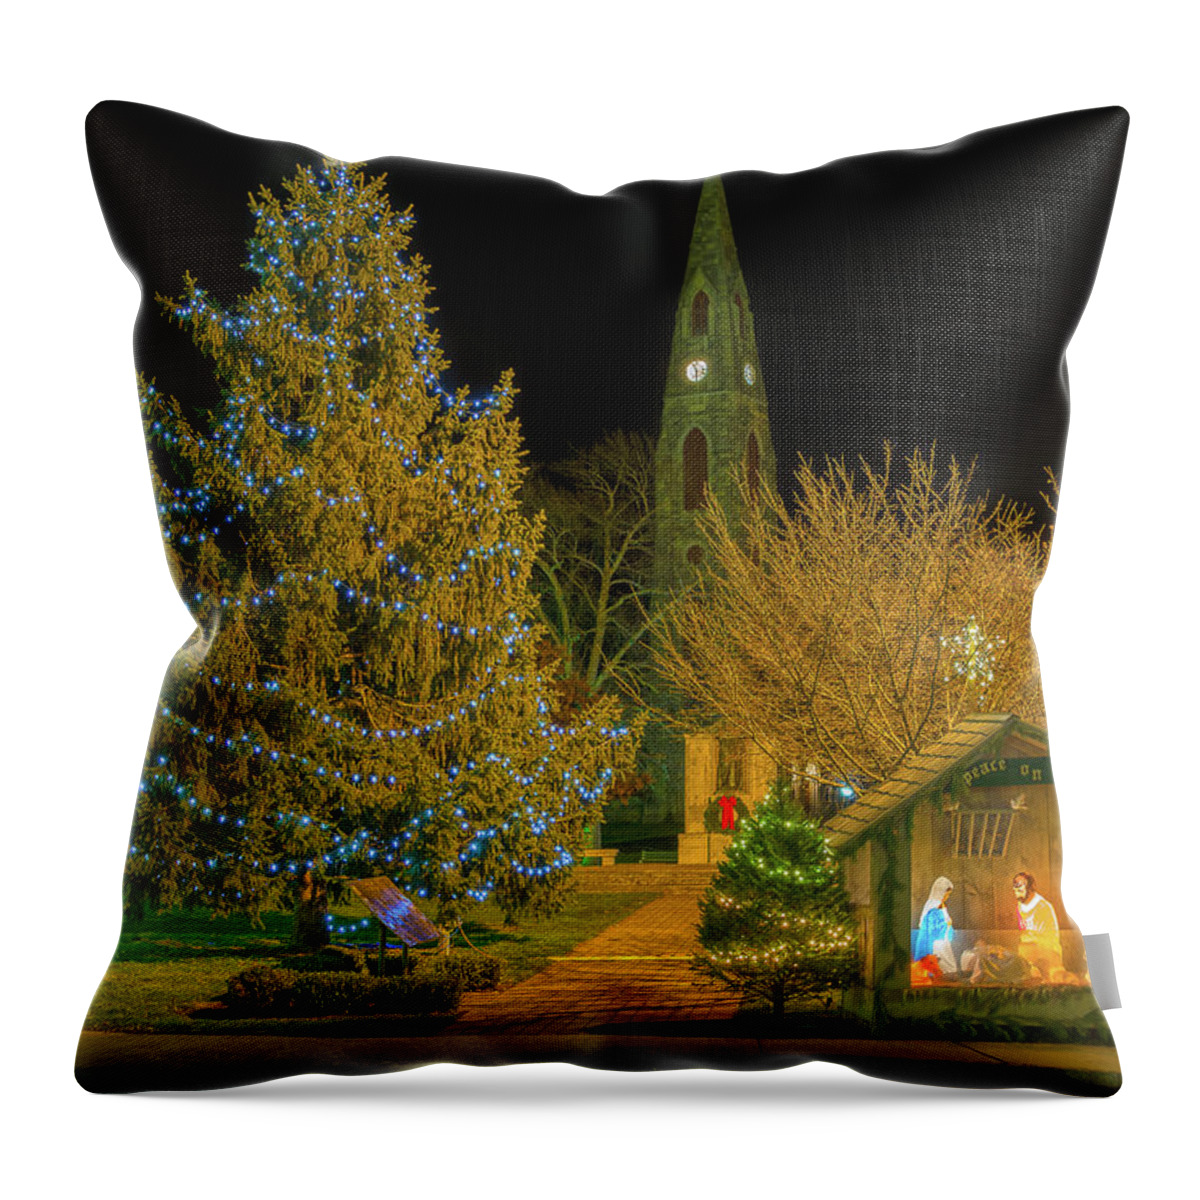 Christmas Throw Pillow featuring the photograph Christmas At The Historic District Of Goshen New York by Angelo Marcialis